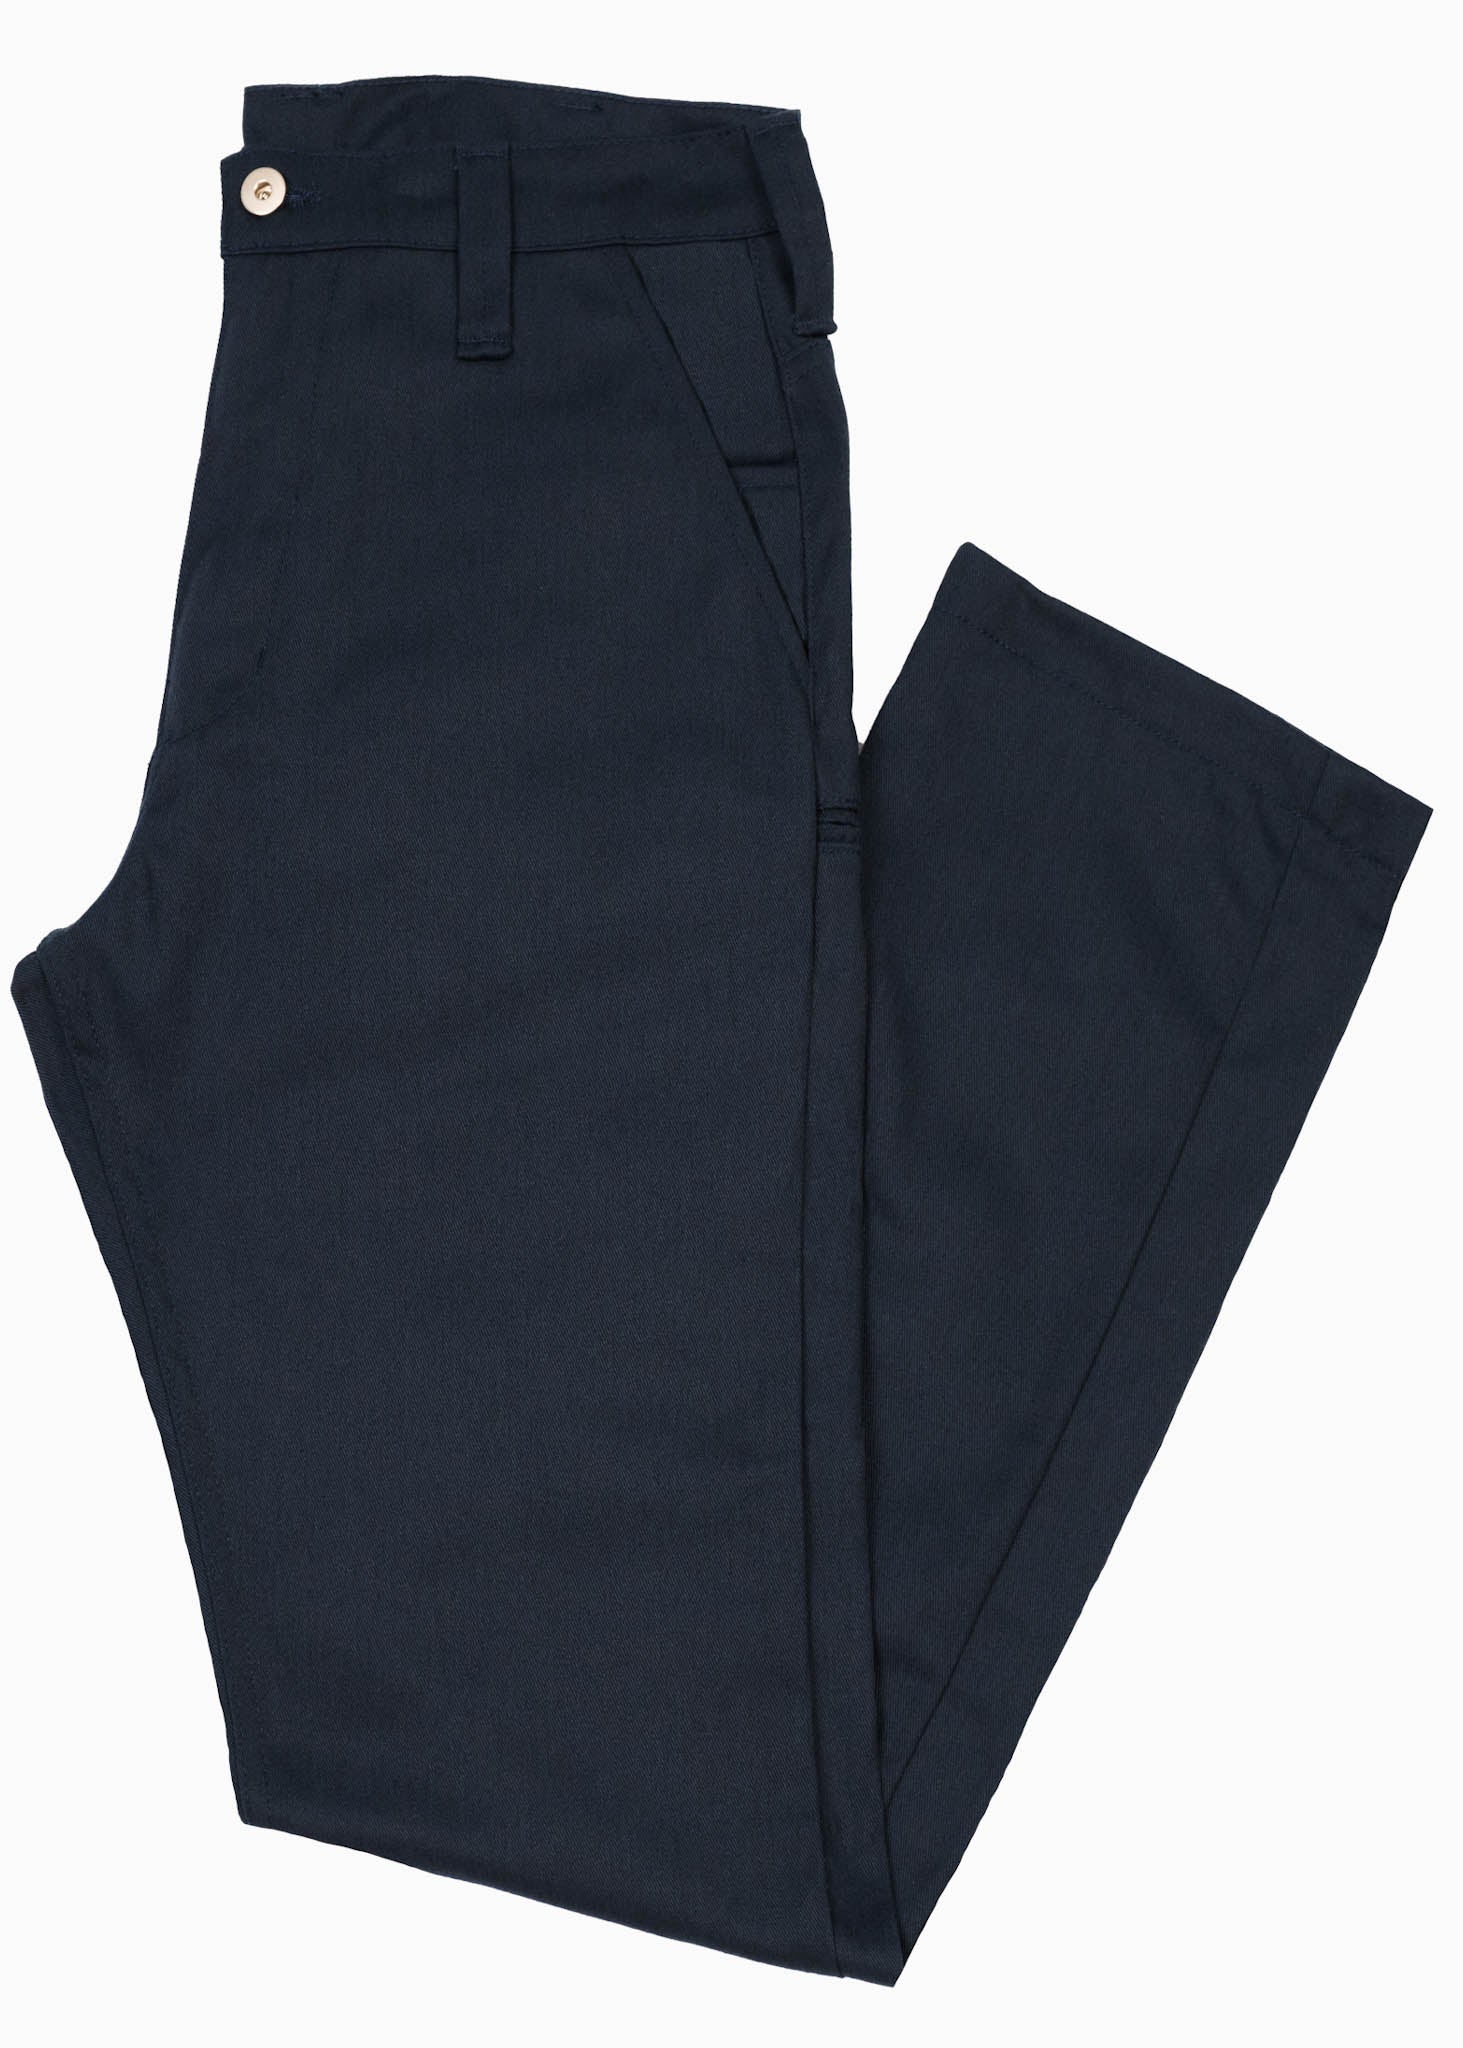 Twill Work Pant Navy FR NFPA